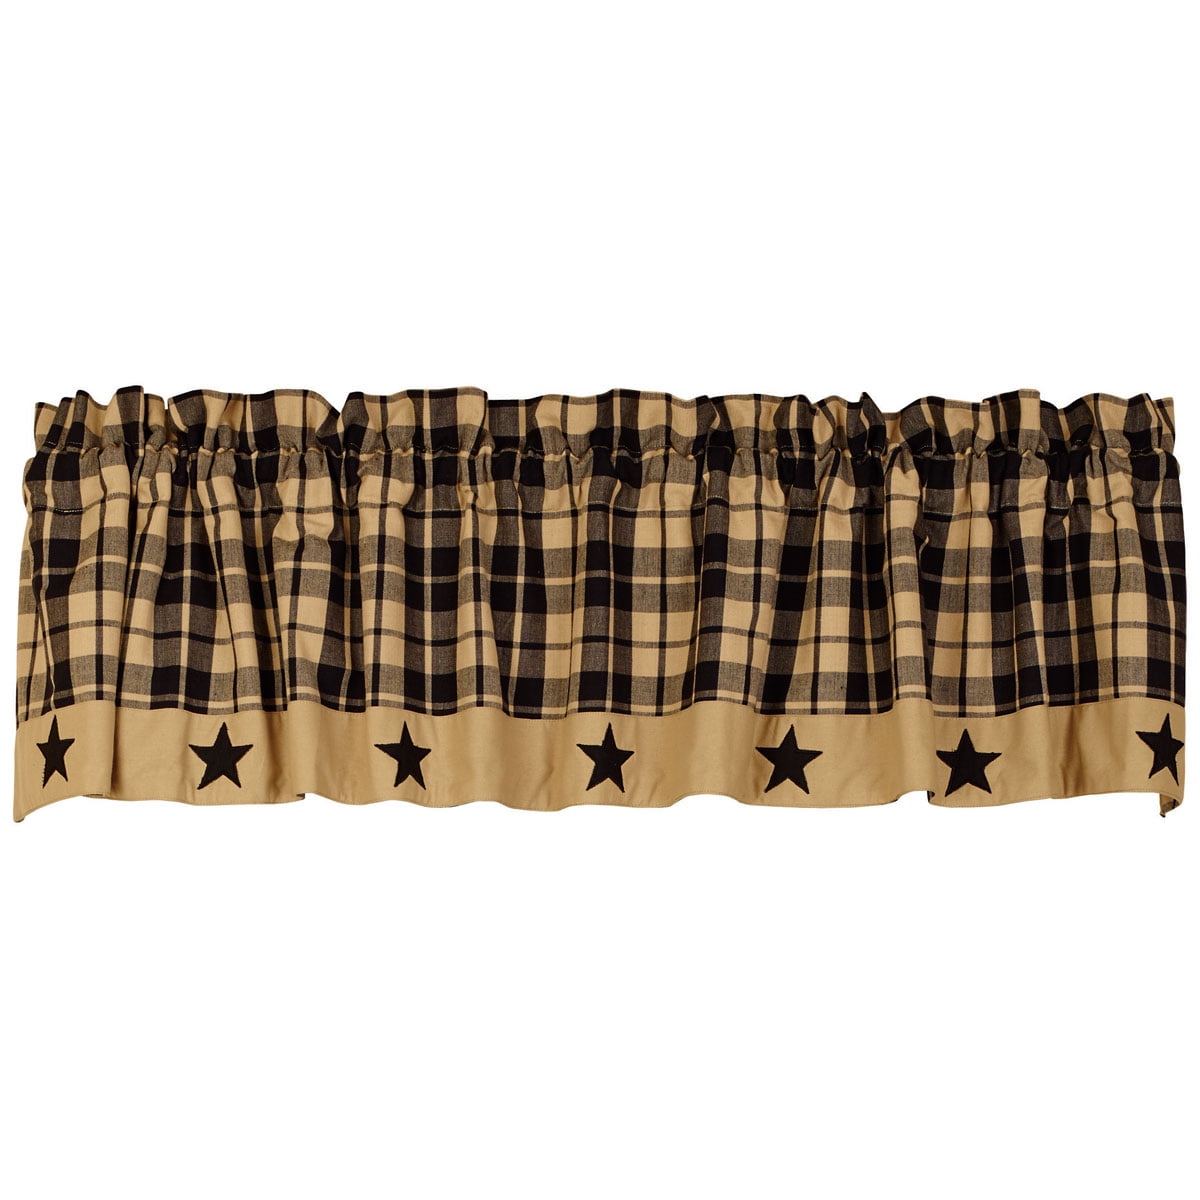 Black and Tan Checked Curtain Tiers Country Star by Park Designs 24" and 36" 